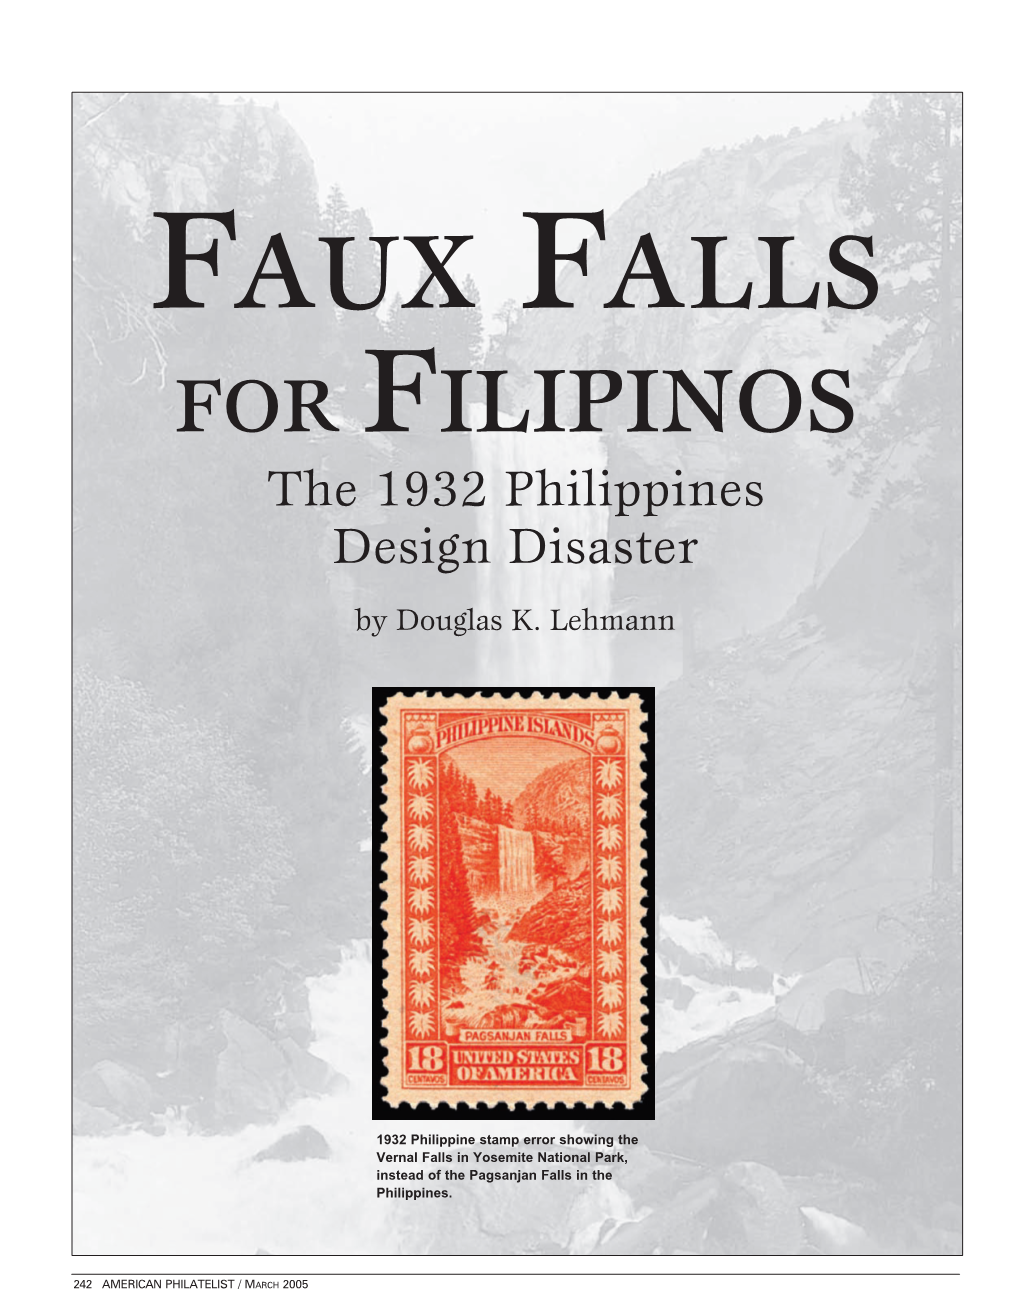 Faux Falls for Filipinos the 1932 Philippines Design Disaster